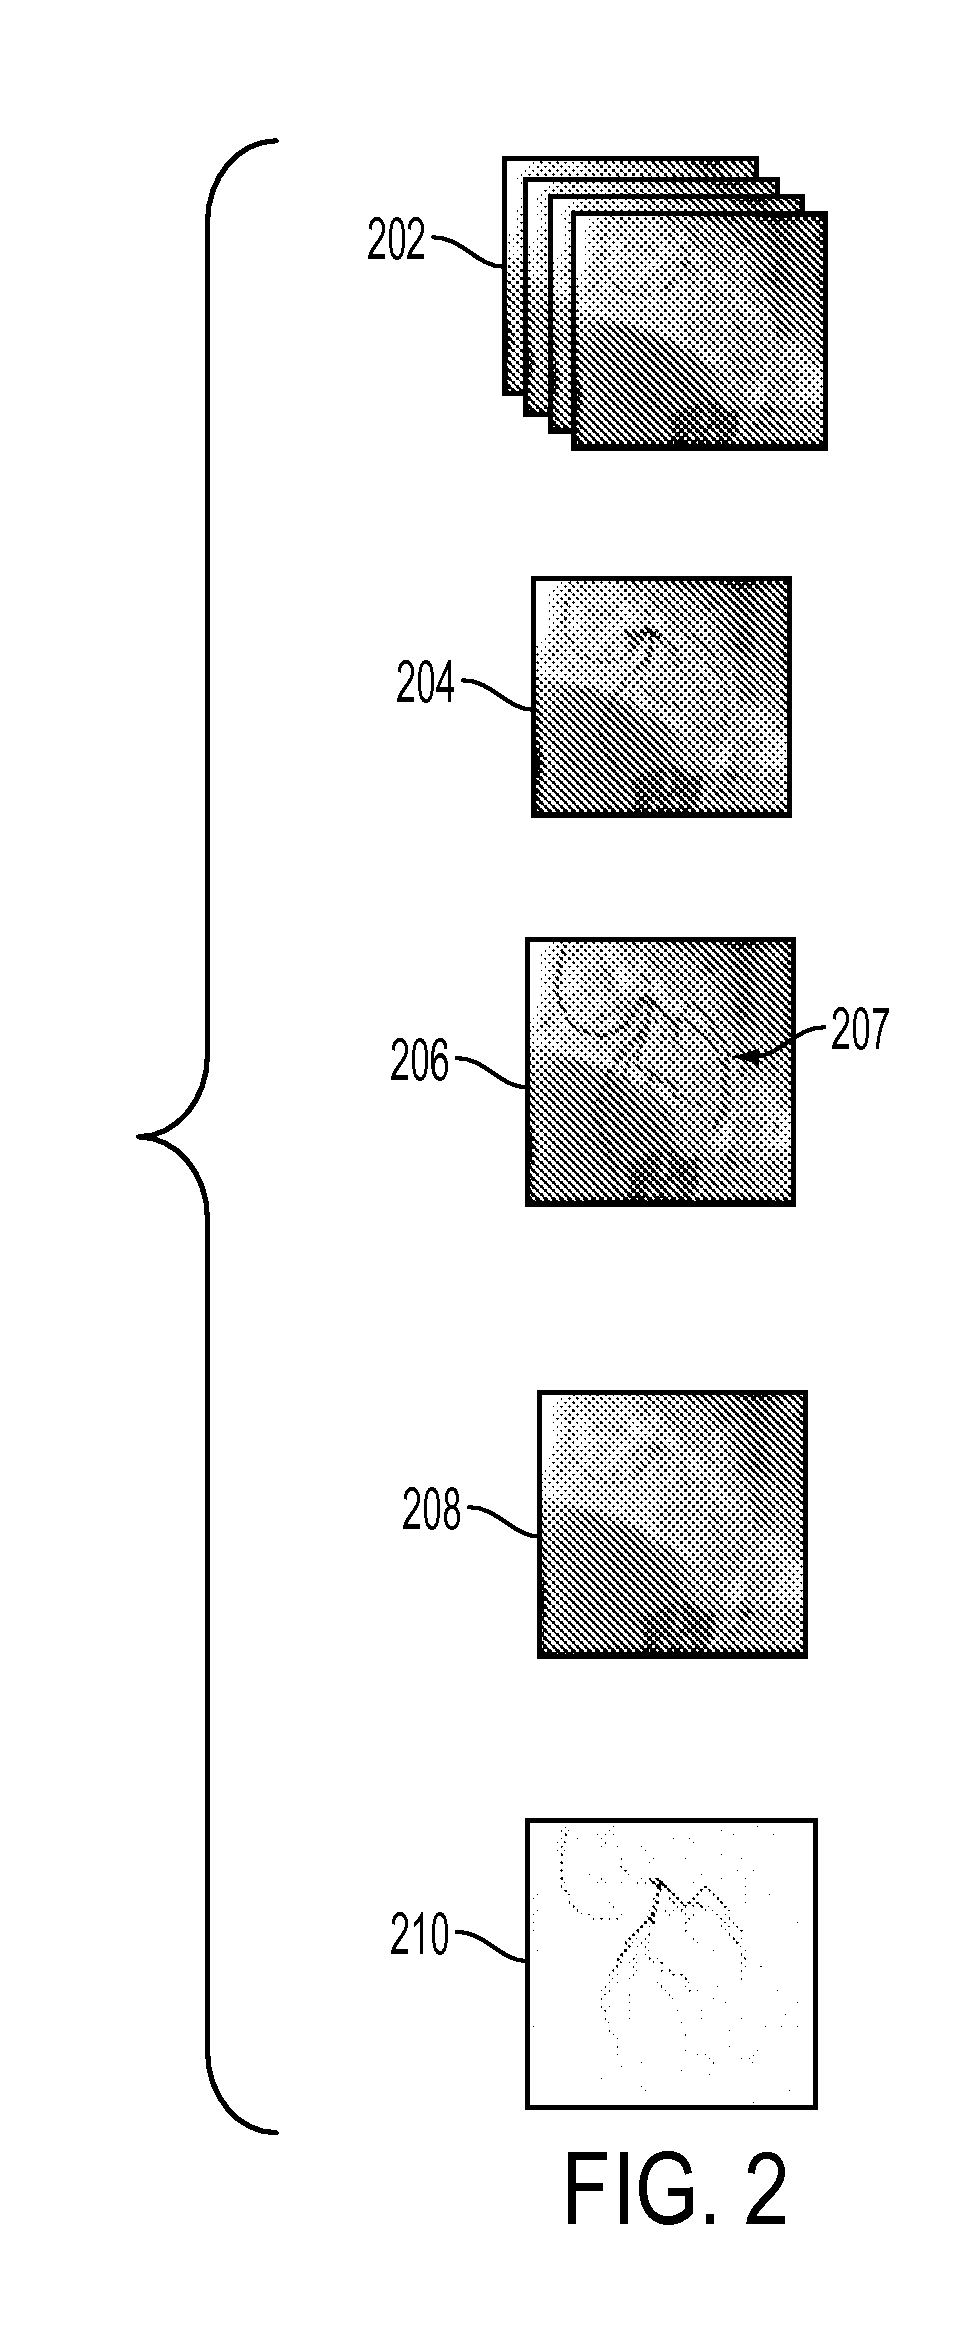 System and method for coronary digital subtraction angiography